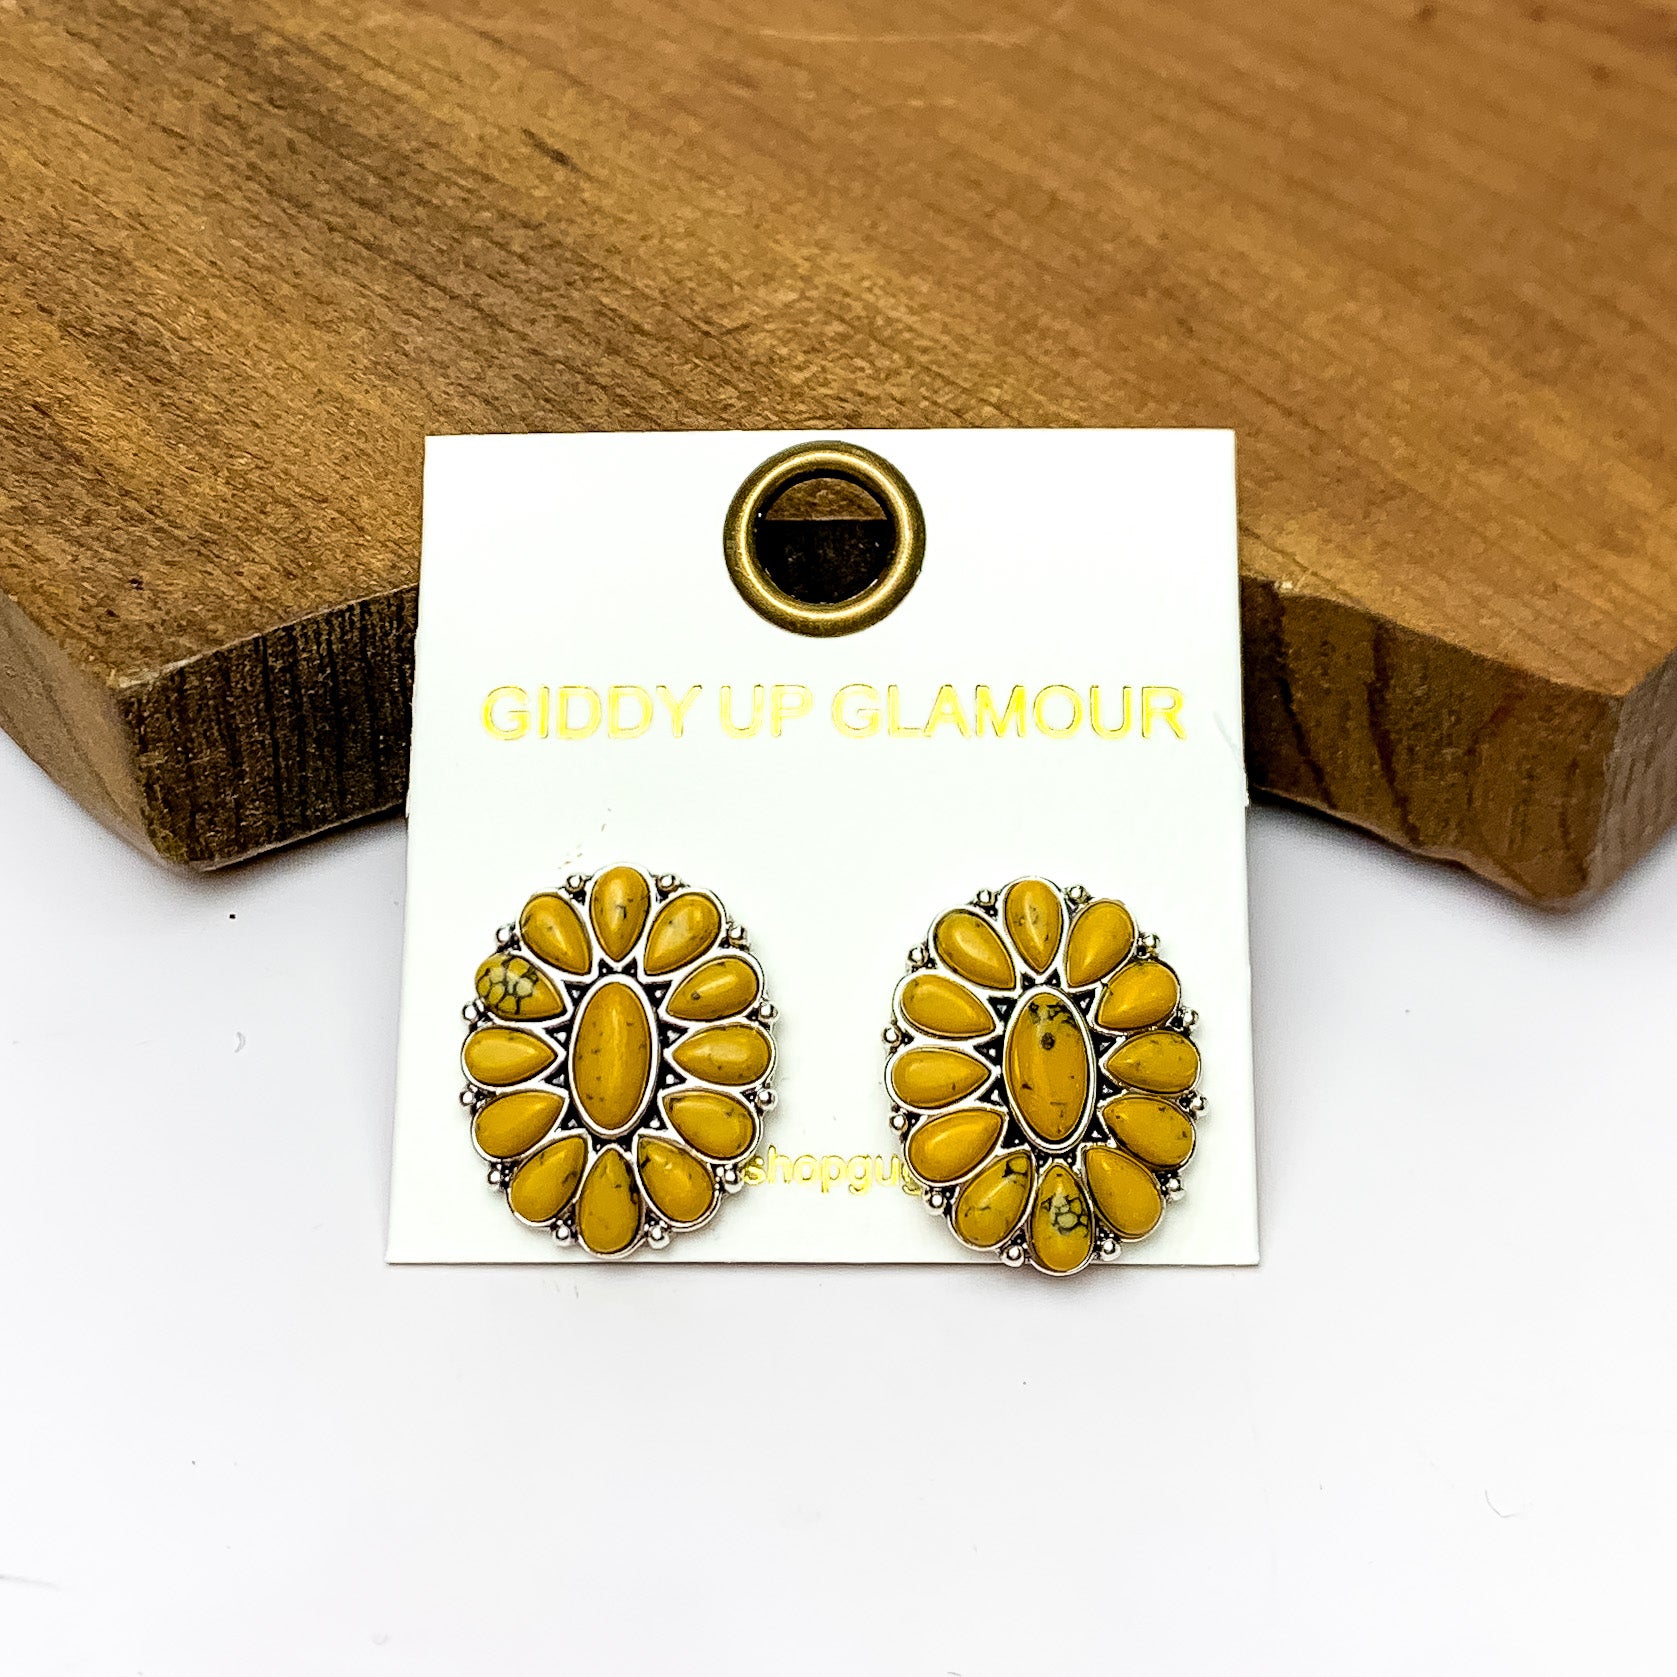 Silver Tone Concho Cluster Oval Earrings in Yellow. Pictured on a white background with the earrings laying against a wood piece.